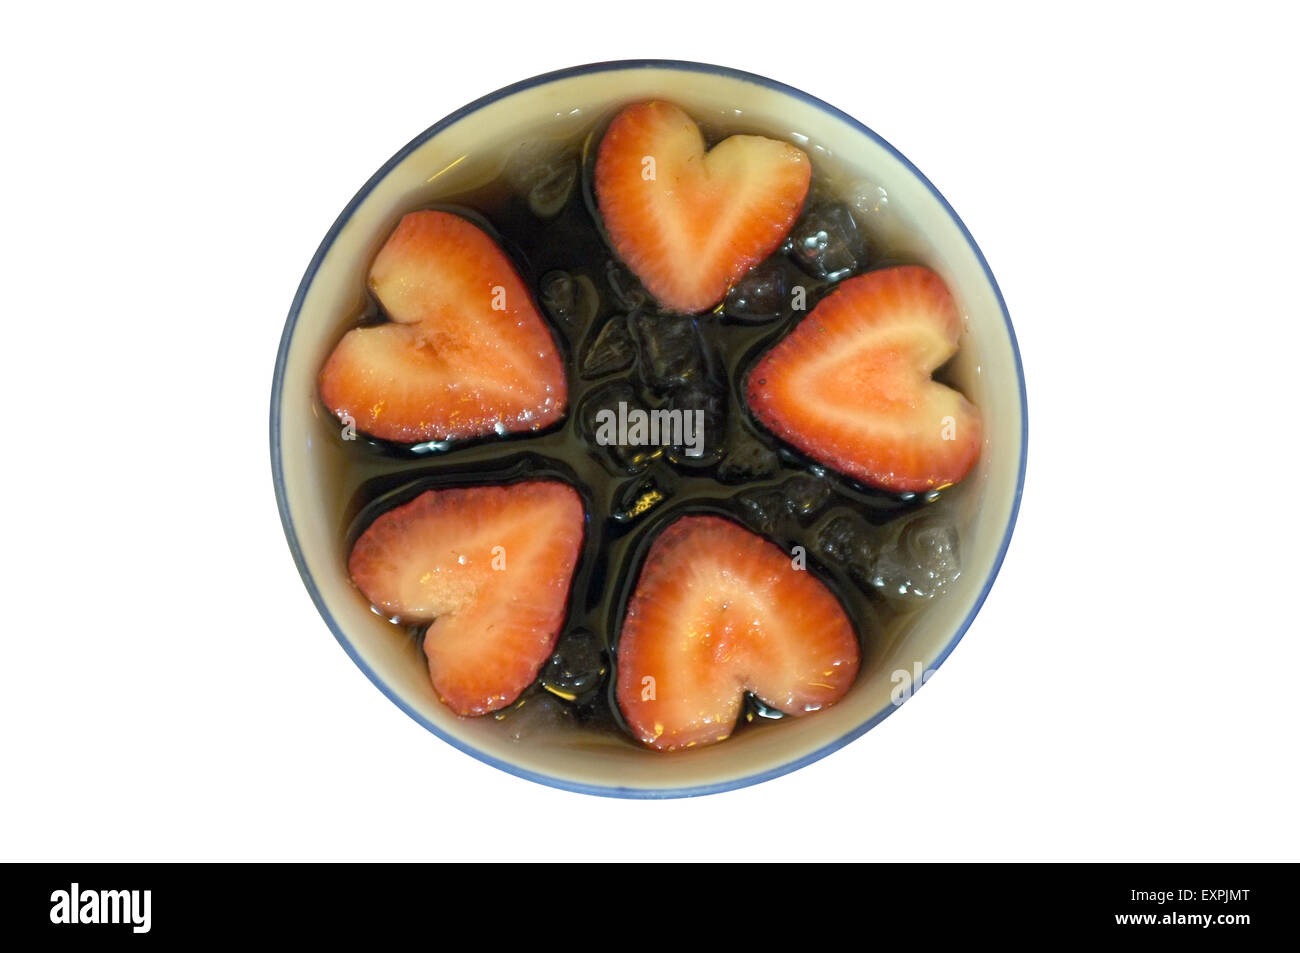 Grass jelly and strawberry with ice in dessert bowl Stock Photo